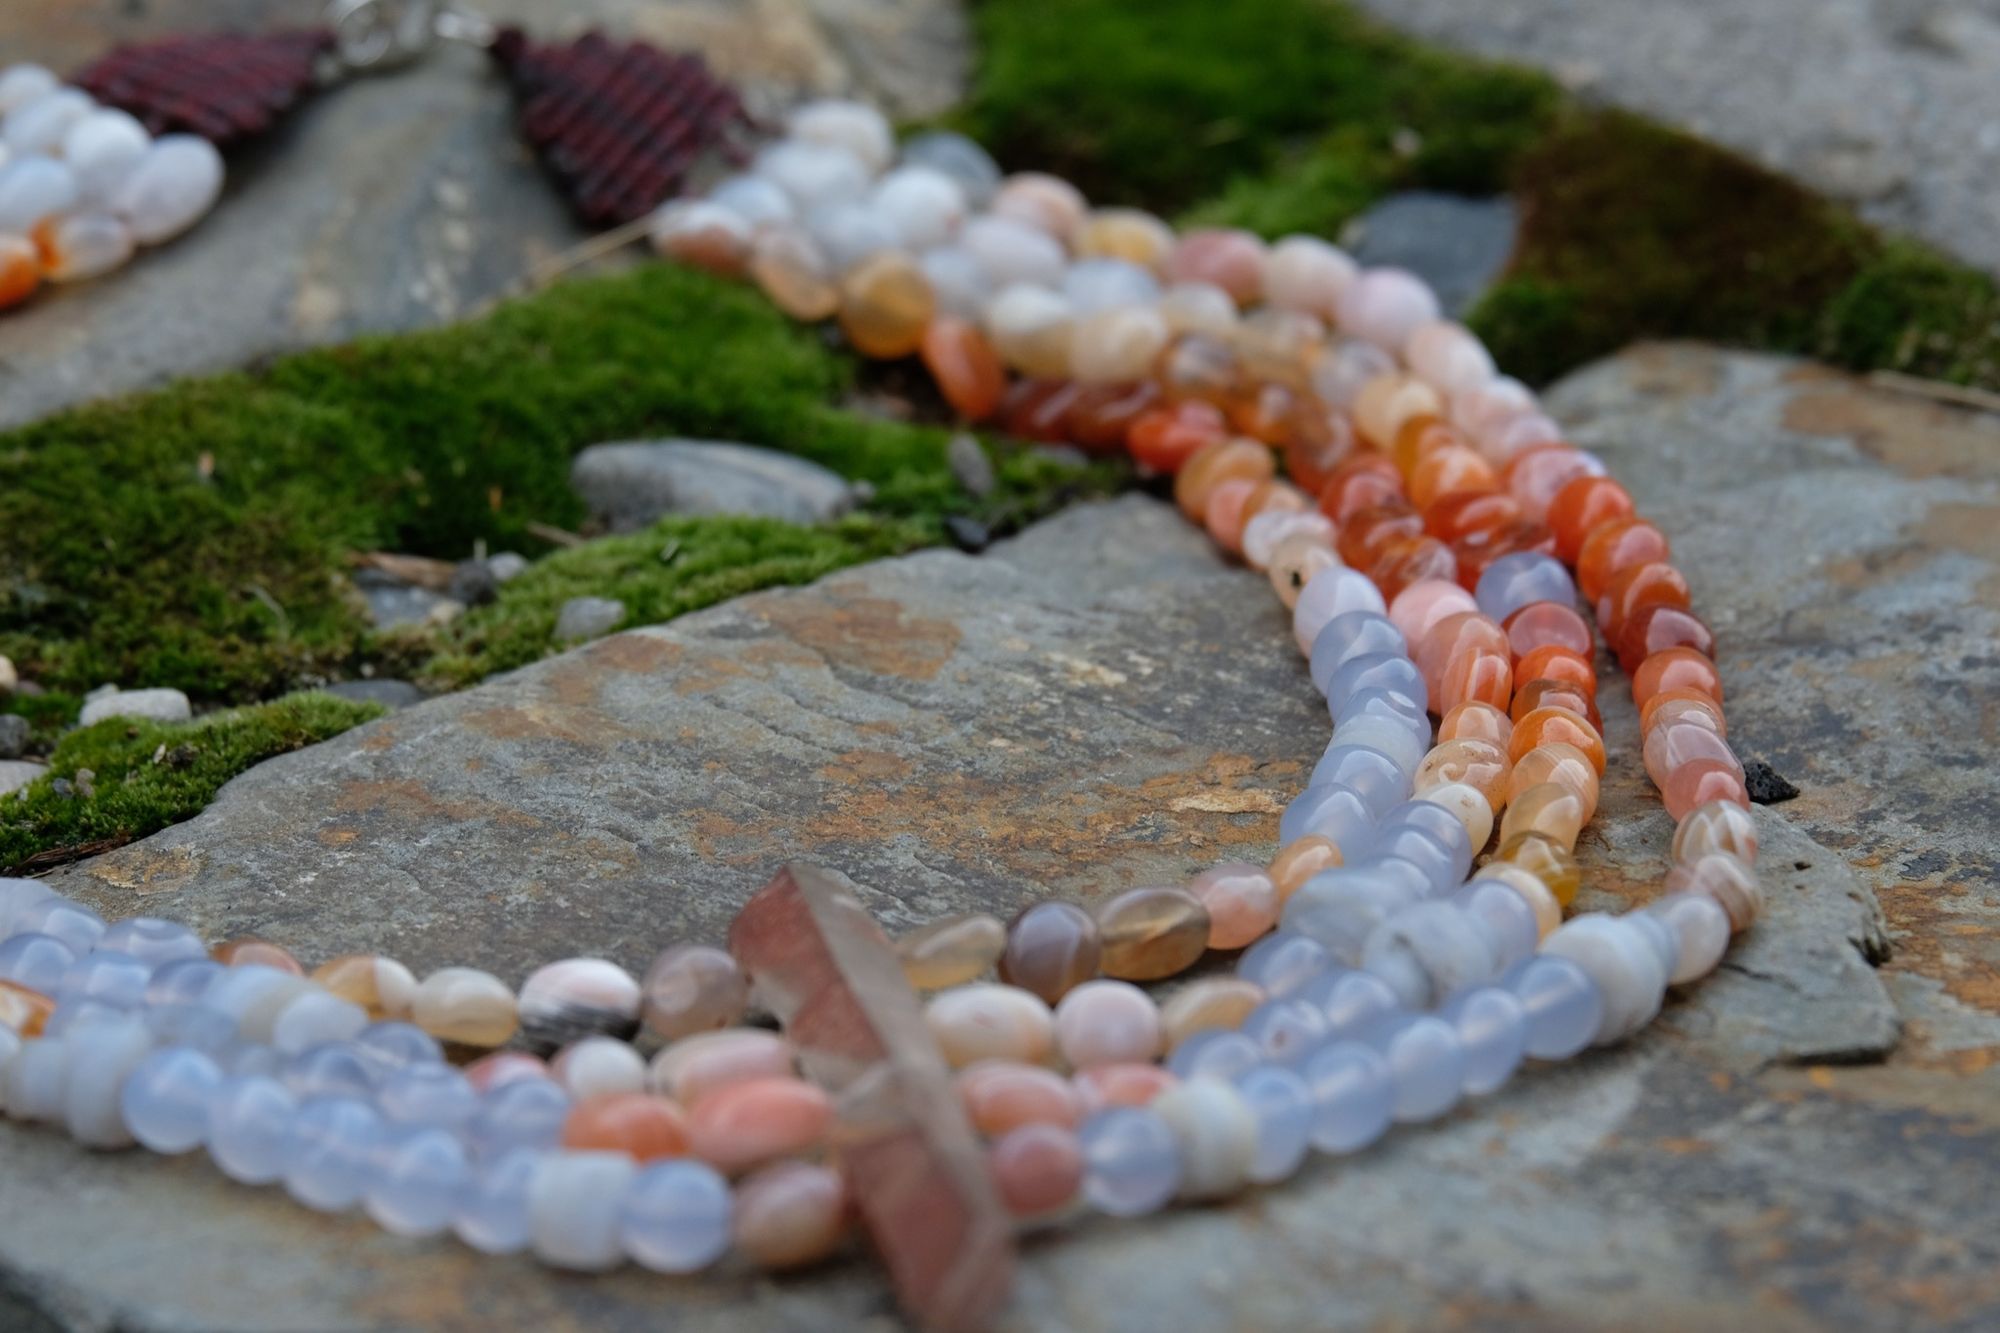 Detail of clear quartz point, red-pink-white graded Botswana agate and blue chalcedony necklace laying on stone